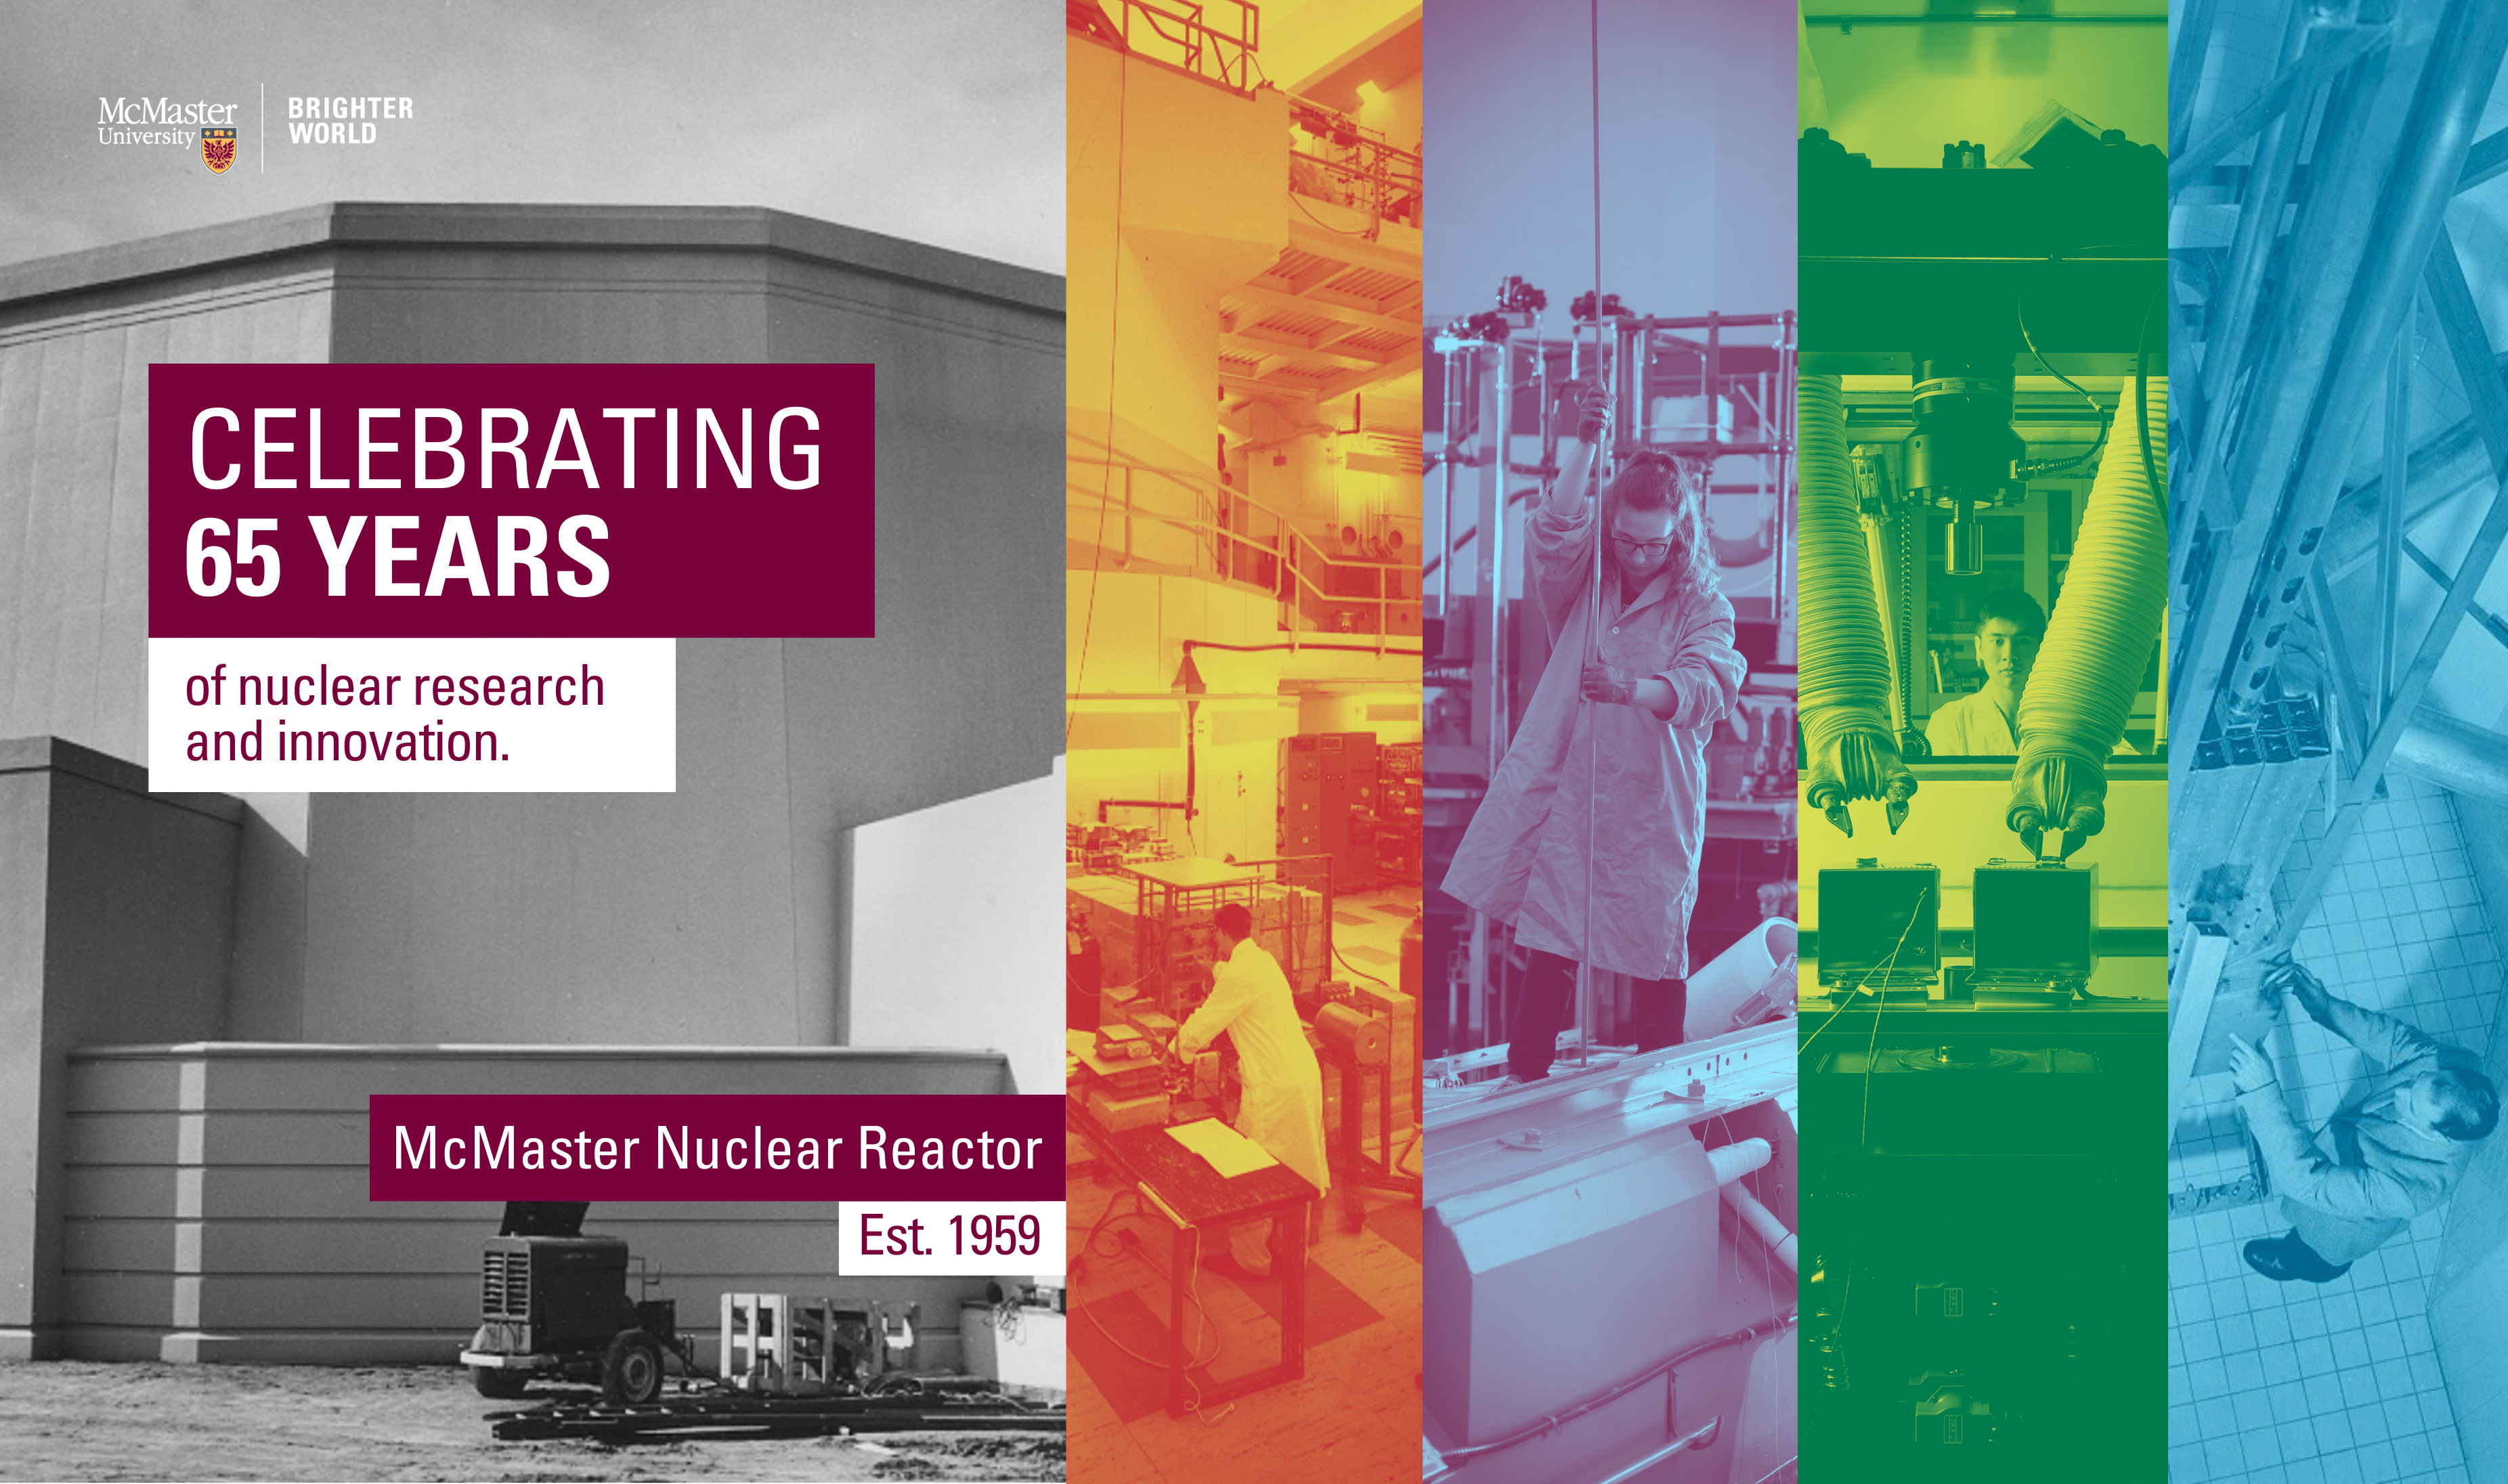 Celebrating 65 years of nuclear research and innovation. McMaster Nuclear Reactor, established 1959.